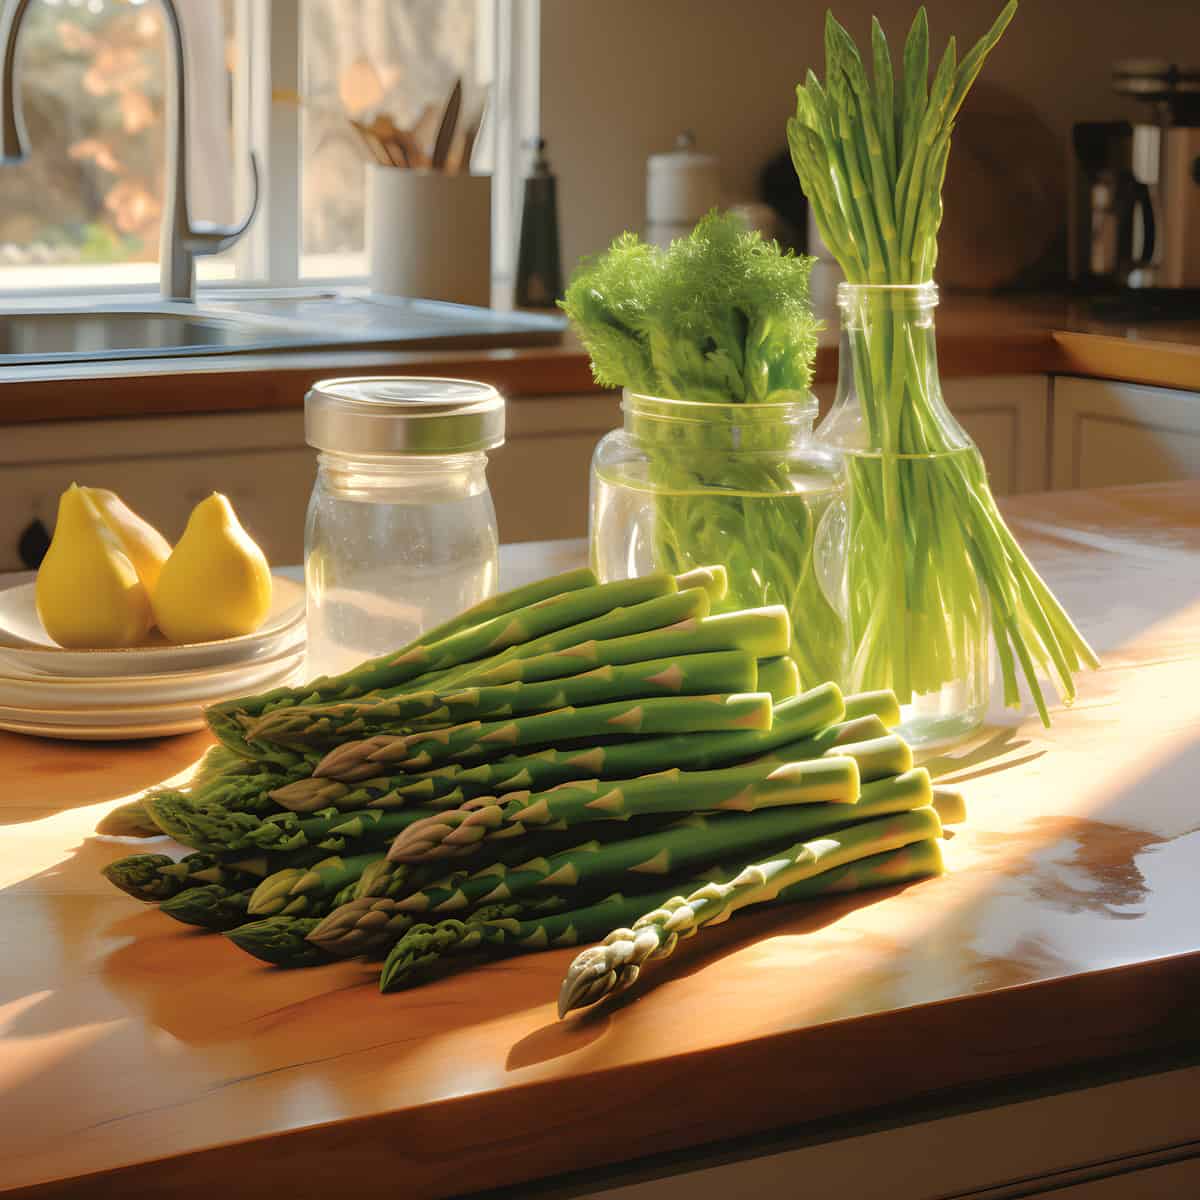 Asparagus on a kitchen counter